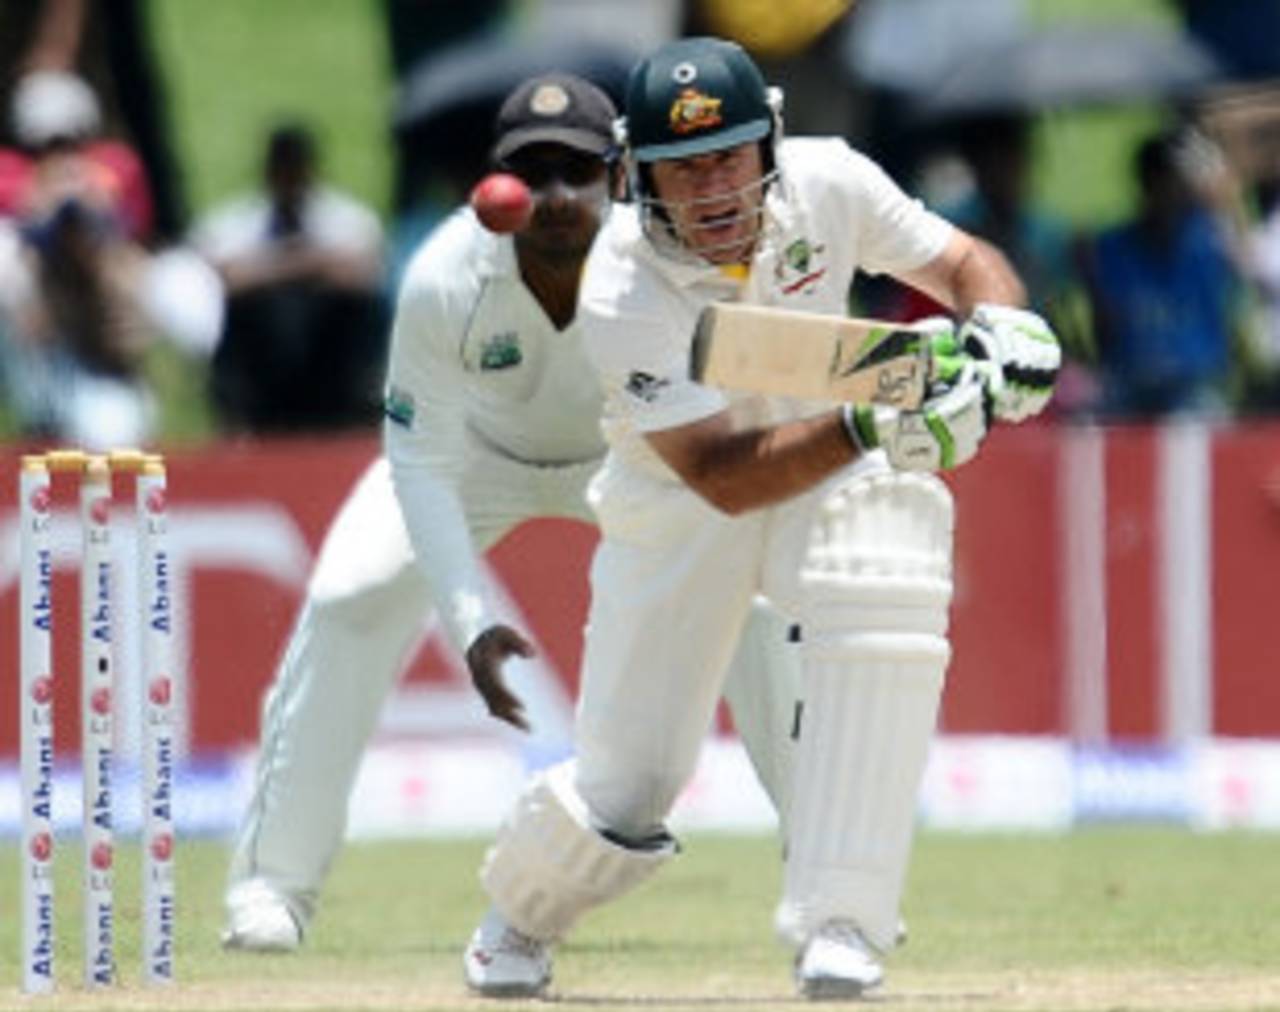 Ricky Ponting steadied Australia after some initial jitters, Sri Lanka v Australia, 1st Test, Galle, 1st day, August 31, 2011